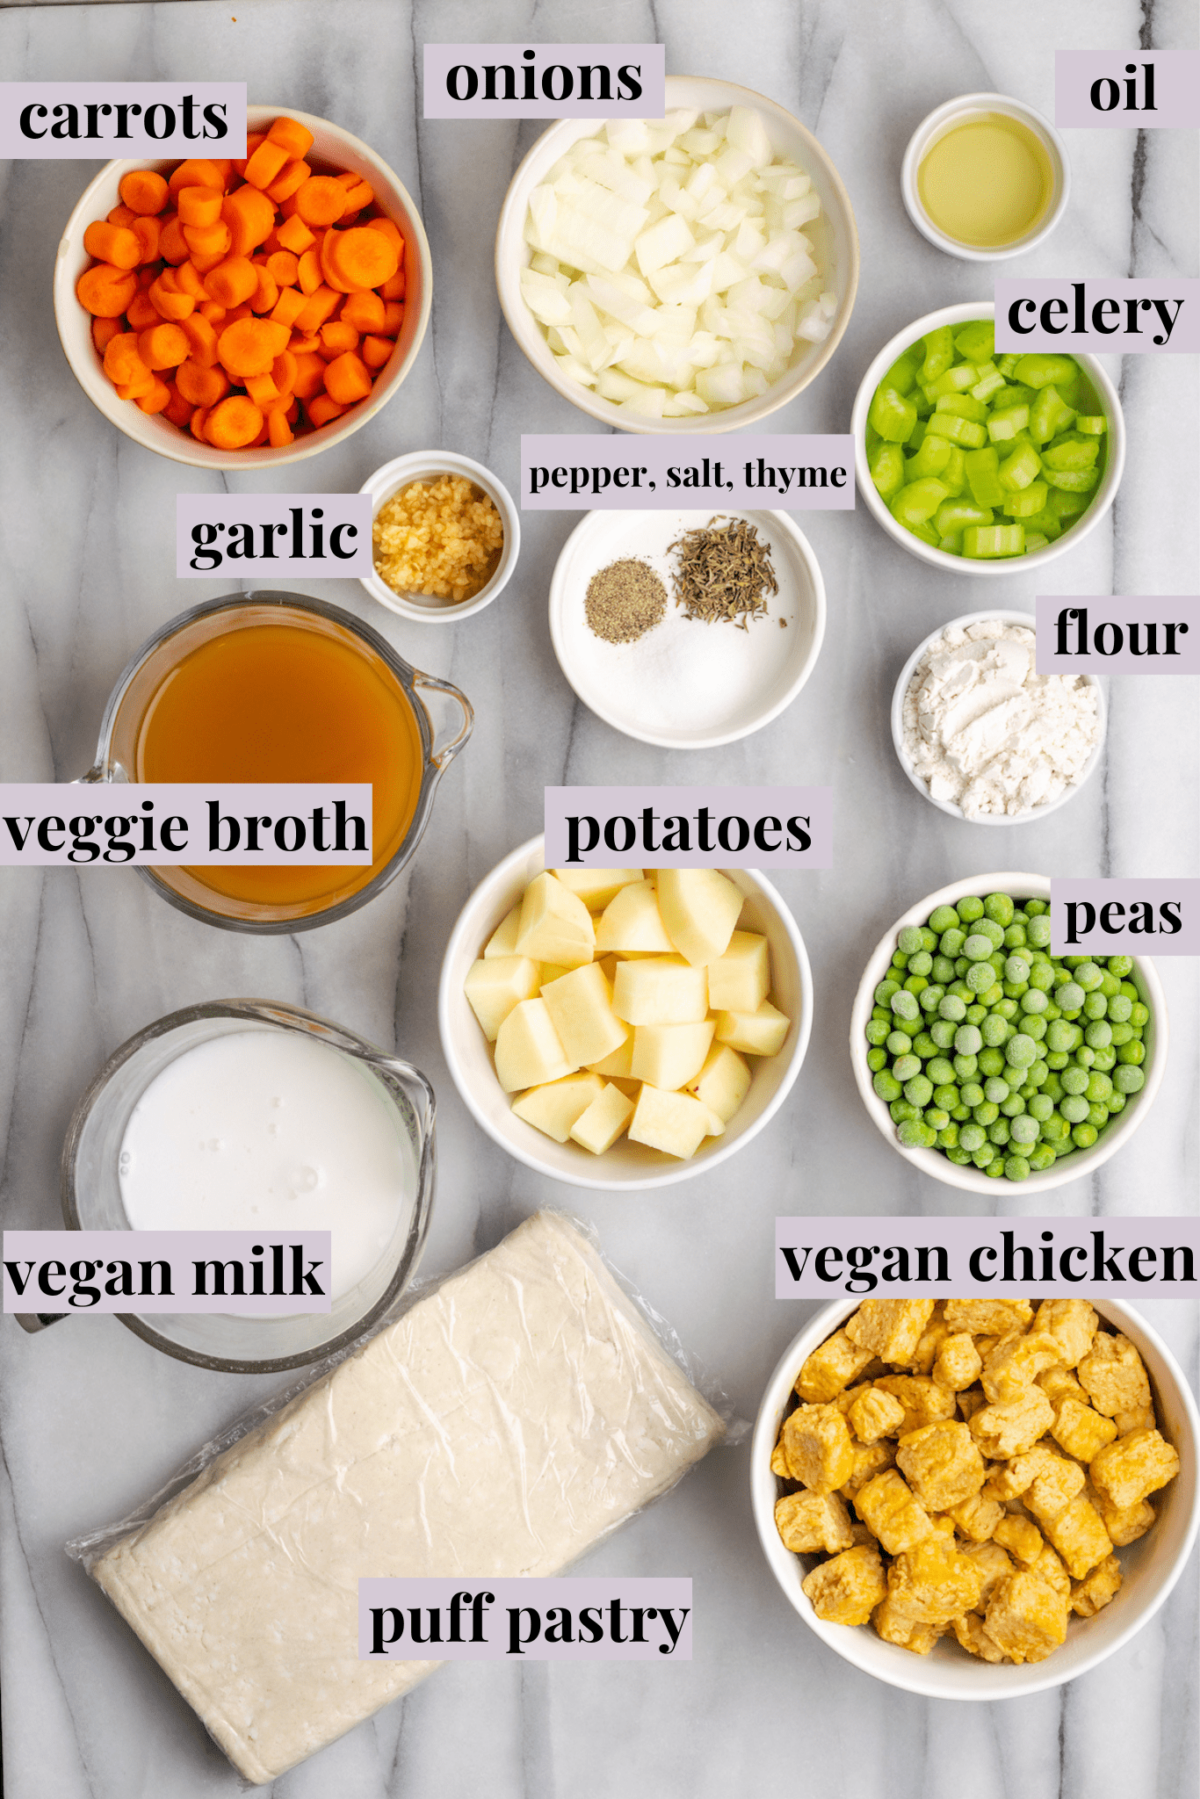 Overhead view of the labeled ingredients for vegan chicken pot pie casserole: a bowl of carrots, a bowl of onions, a bowl of oil, a bowl of celery, a bowl of vegetable broth, a bowl of garlic, a bowl of salt, pepper, and thyme, a bowl of flour, a bowl of peas, a bowl of potatoes, a bowl of vegan milk, a bowl of vegan chicken, and a piece of puff pastry